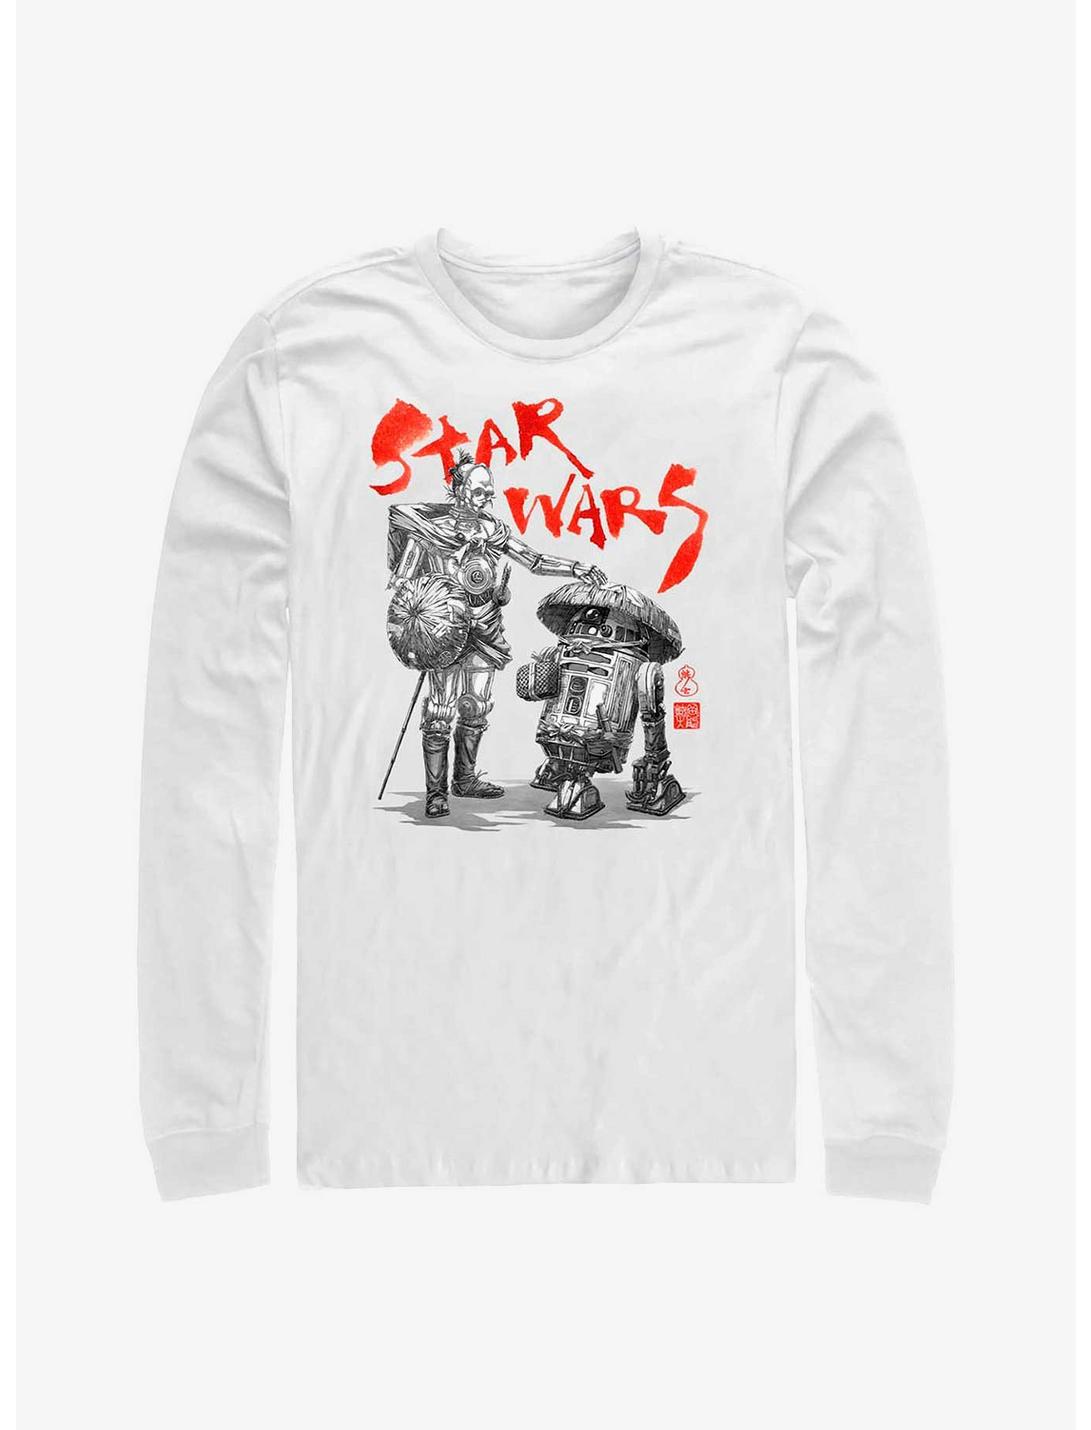 Star Wars: Visions Anime Droids Long-Sleeve T-Shirt, WHITE, hi-res